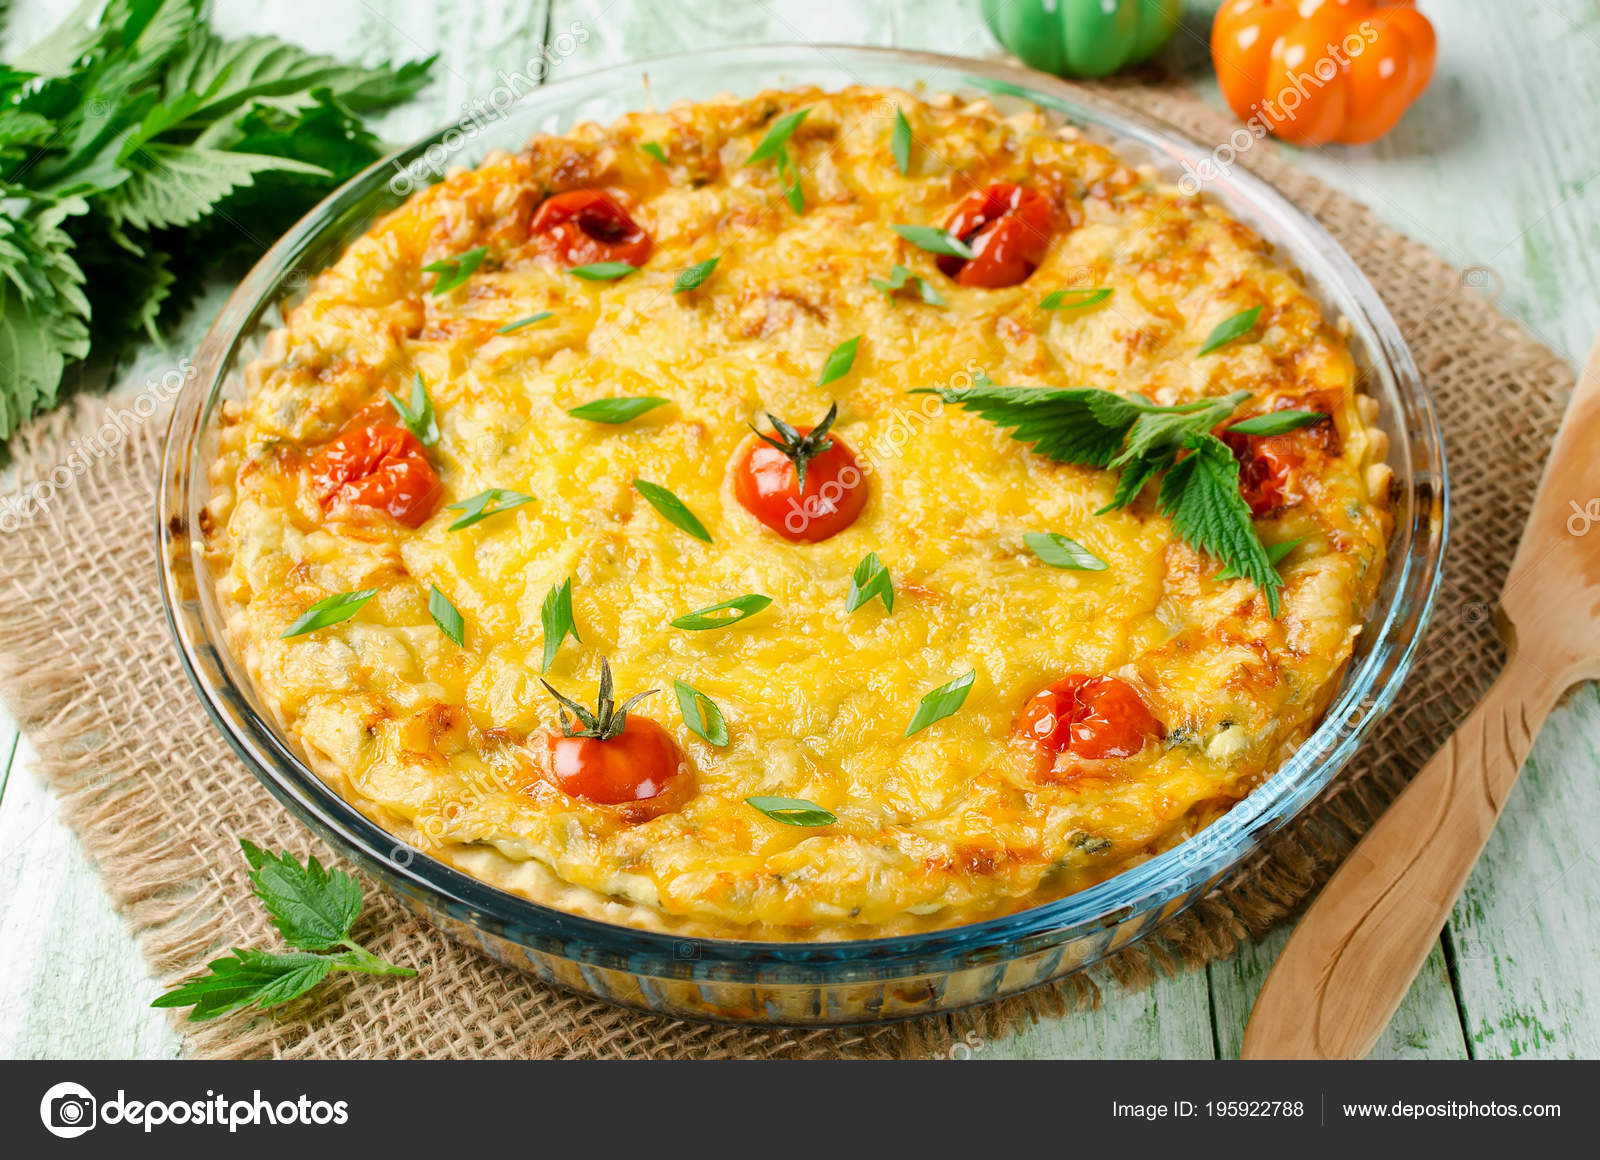 Quiche Pie Cottage Cheese Nettles Homemade Backing Stock Photo